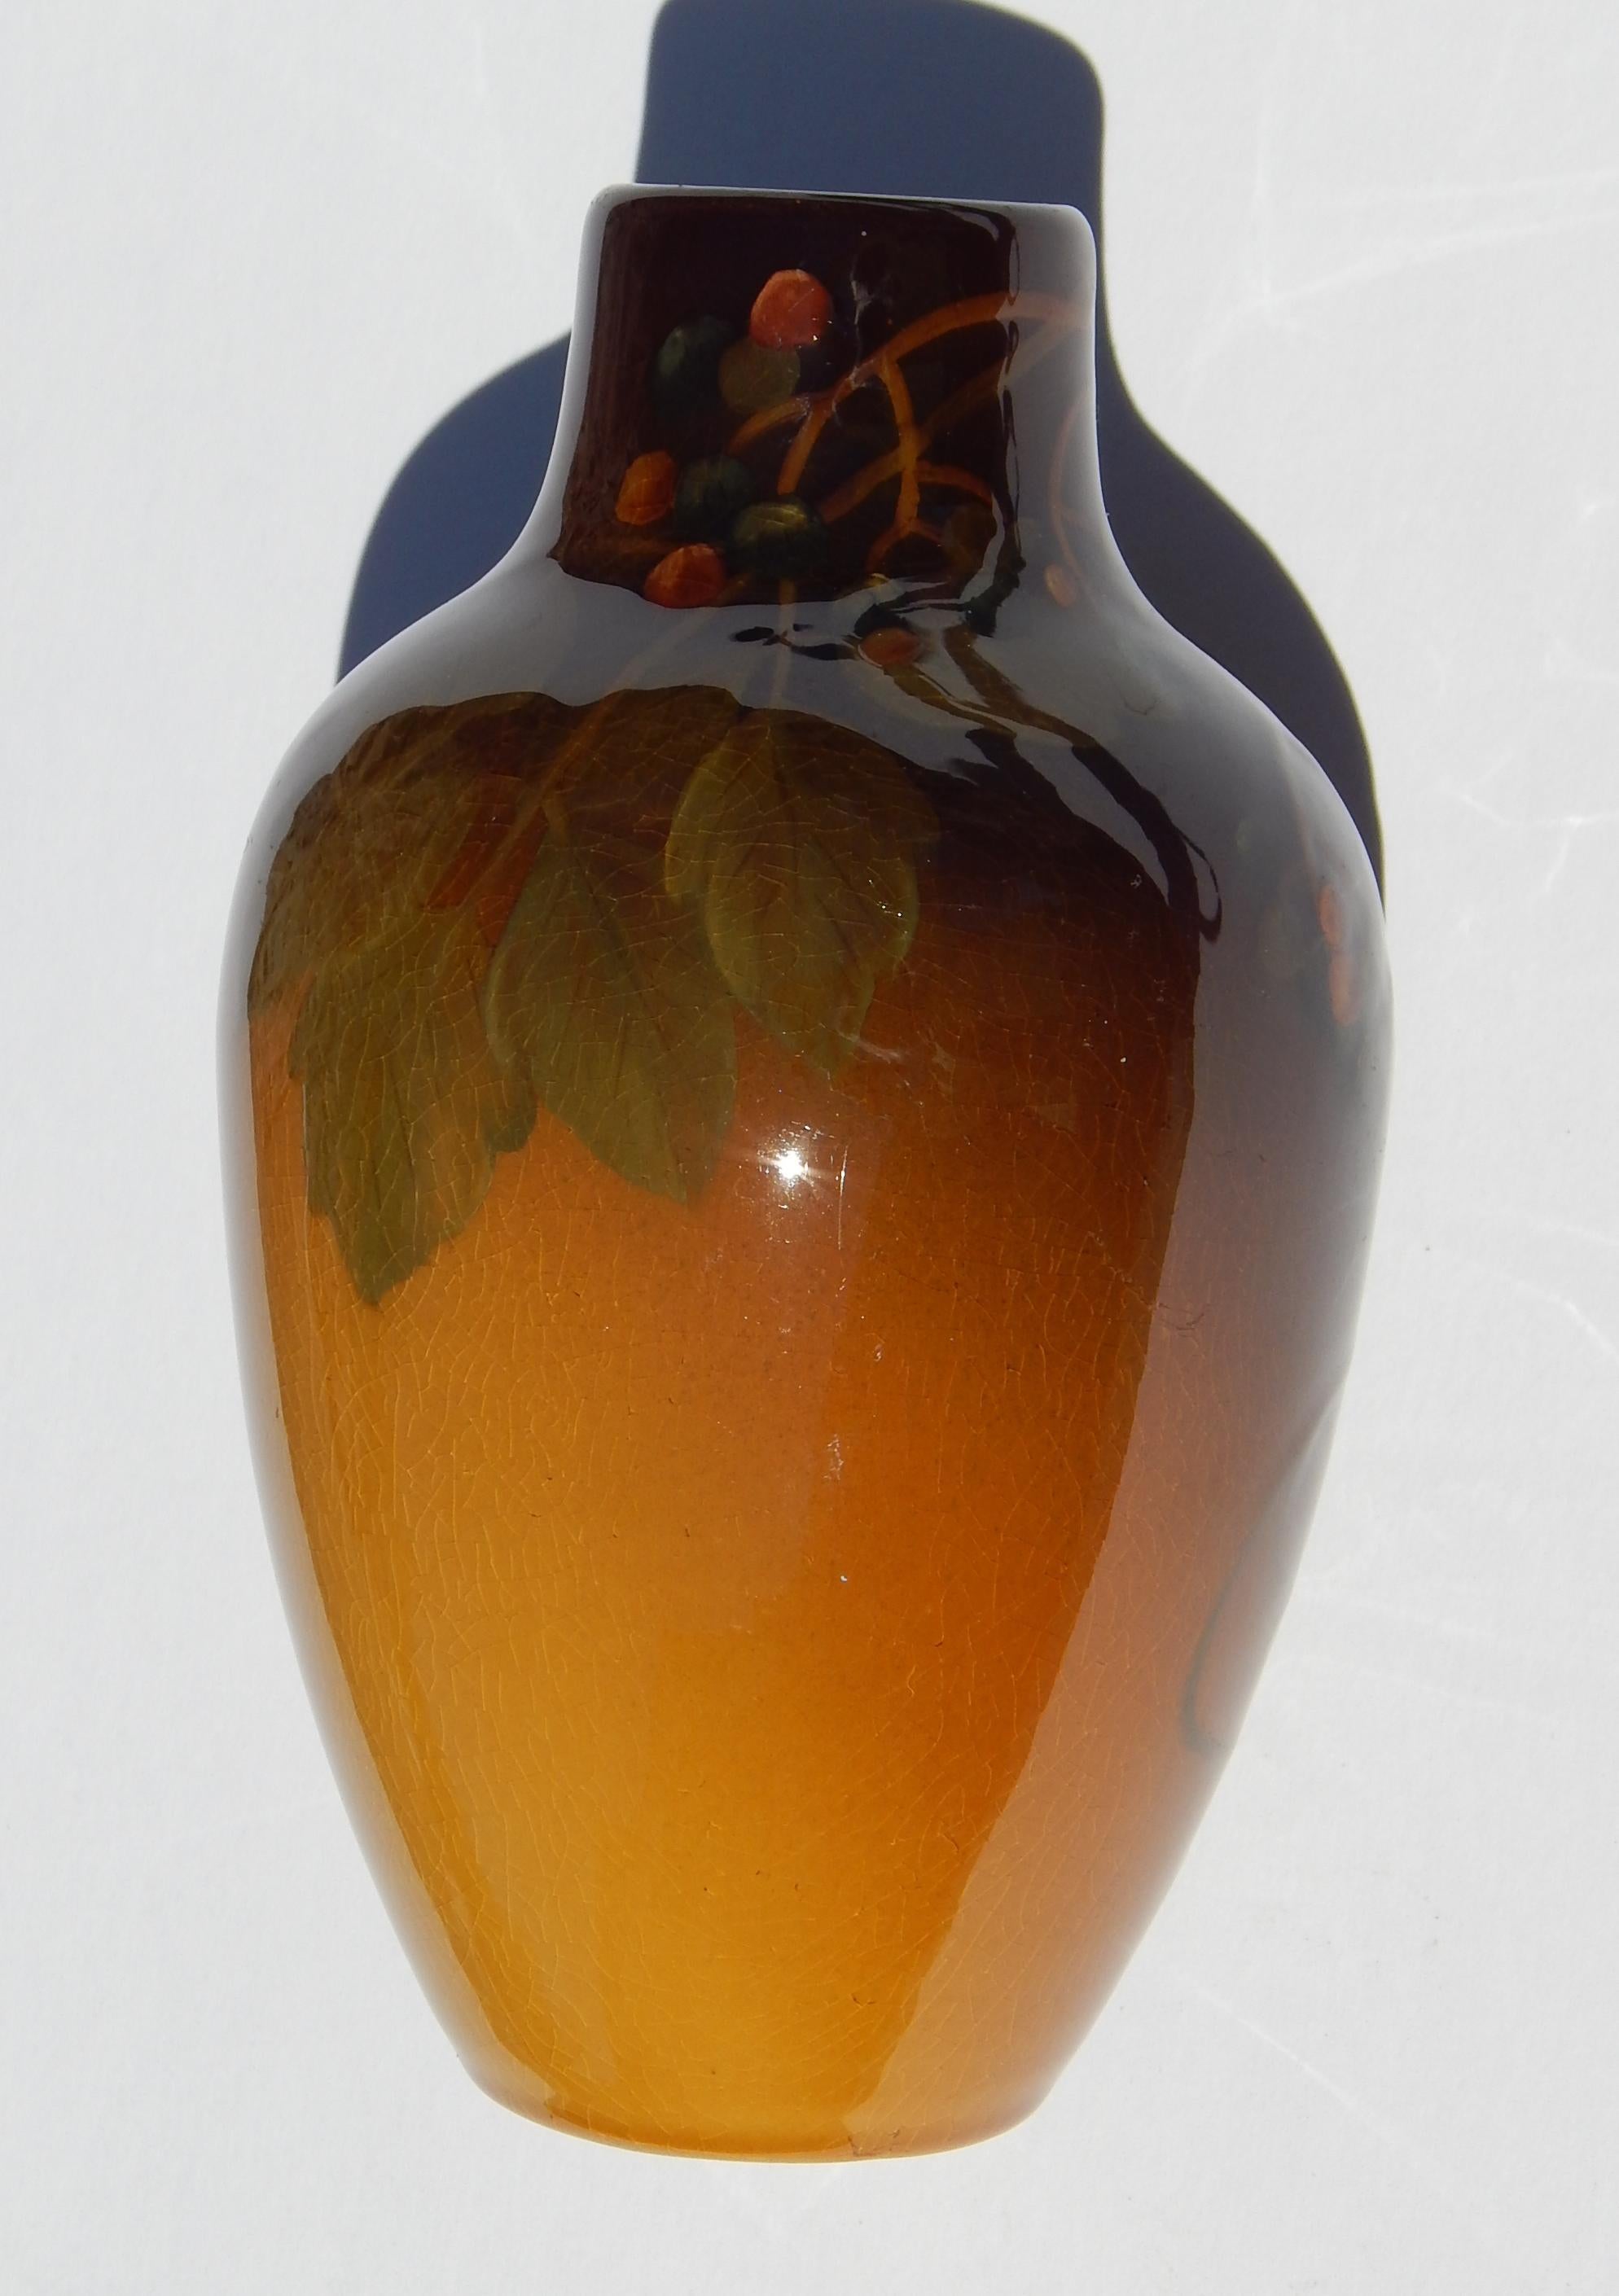 Rookwood pottery standard glaze vase in mint condition.
Marked with the Rookwood mark, JS artist’s initials & 905E.
Measures: 6 5/8